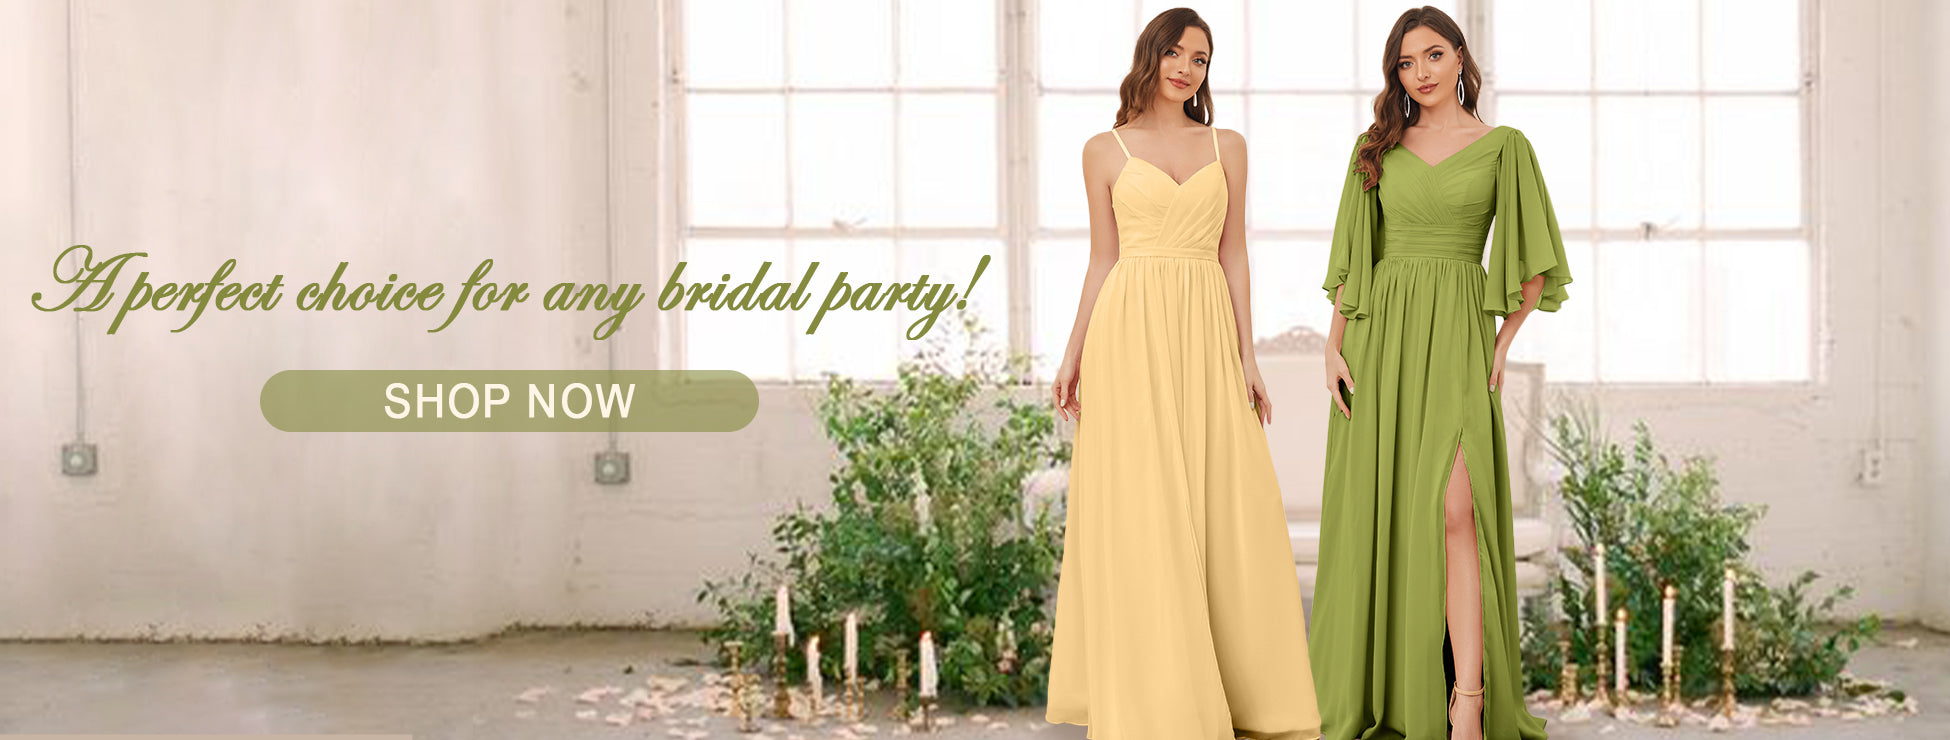 Affordable Prom, Wedding & Bridesmaid Dresses | Ombreprom